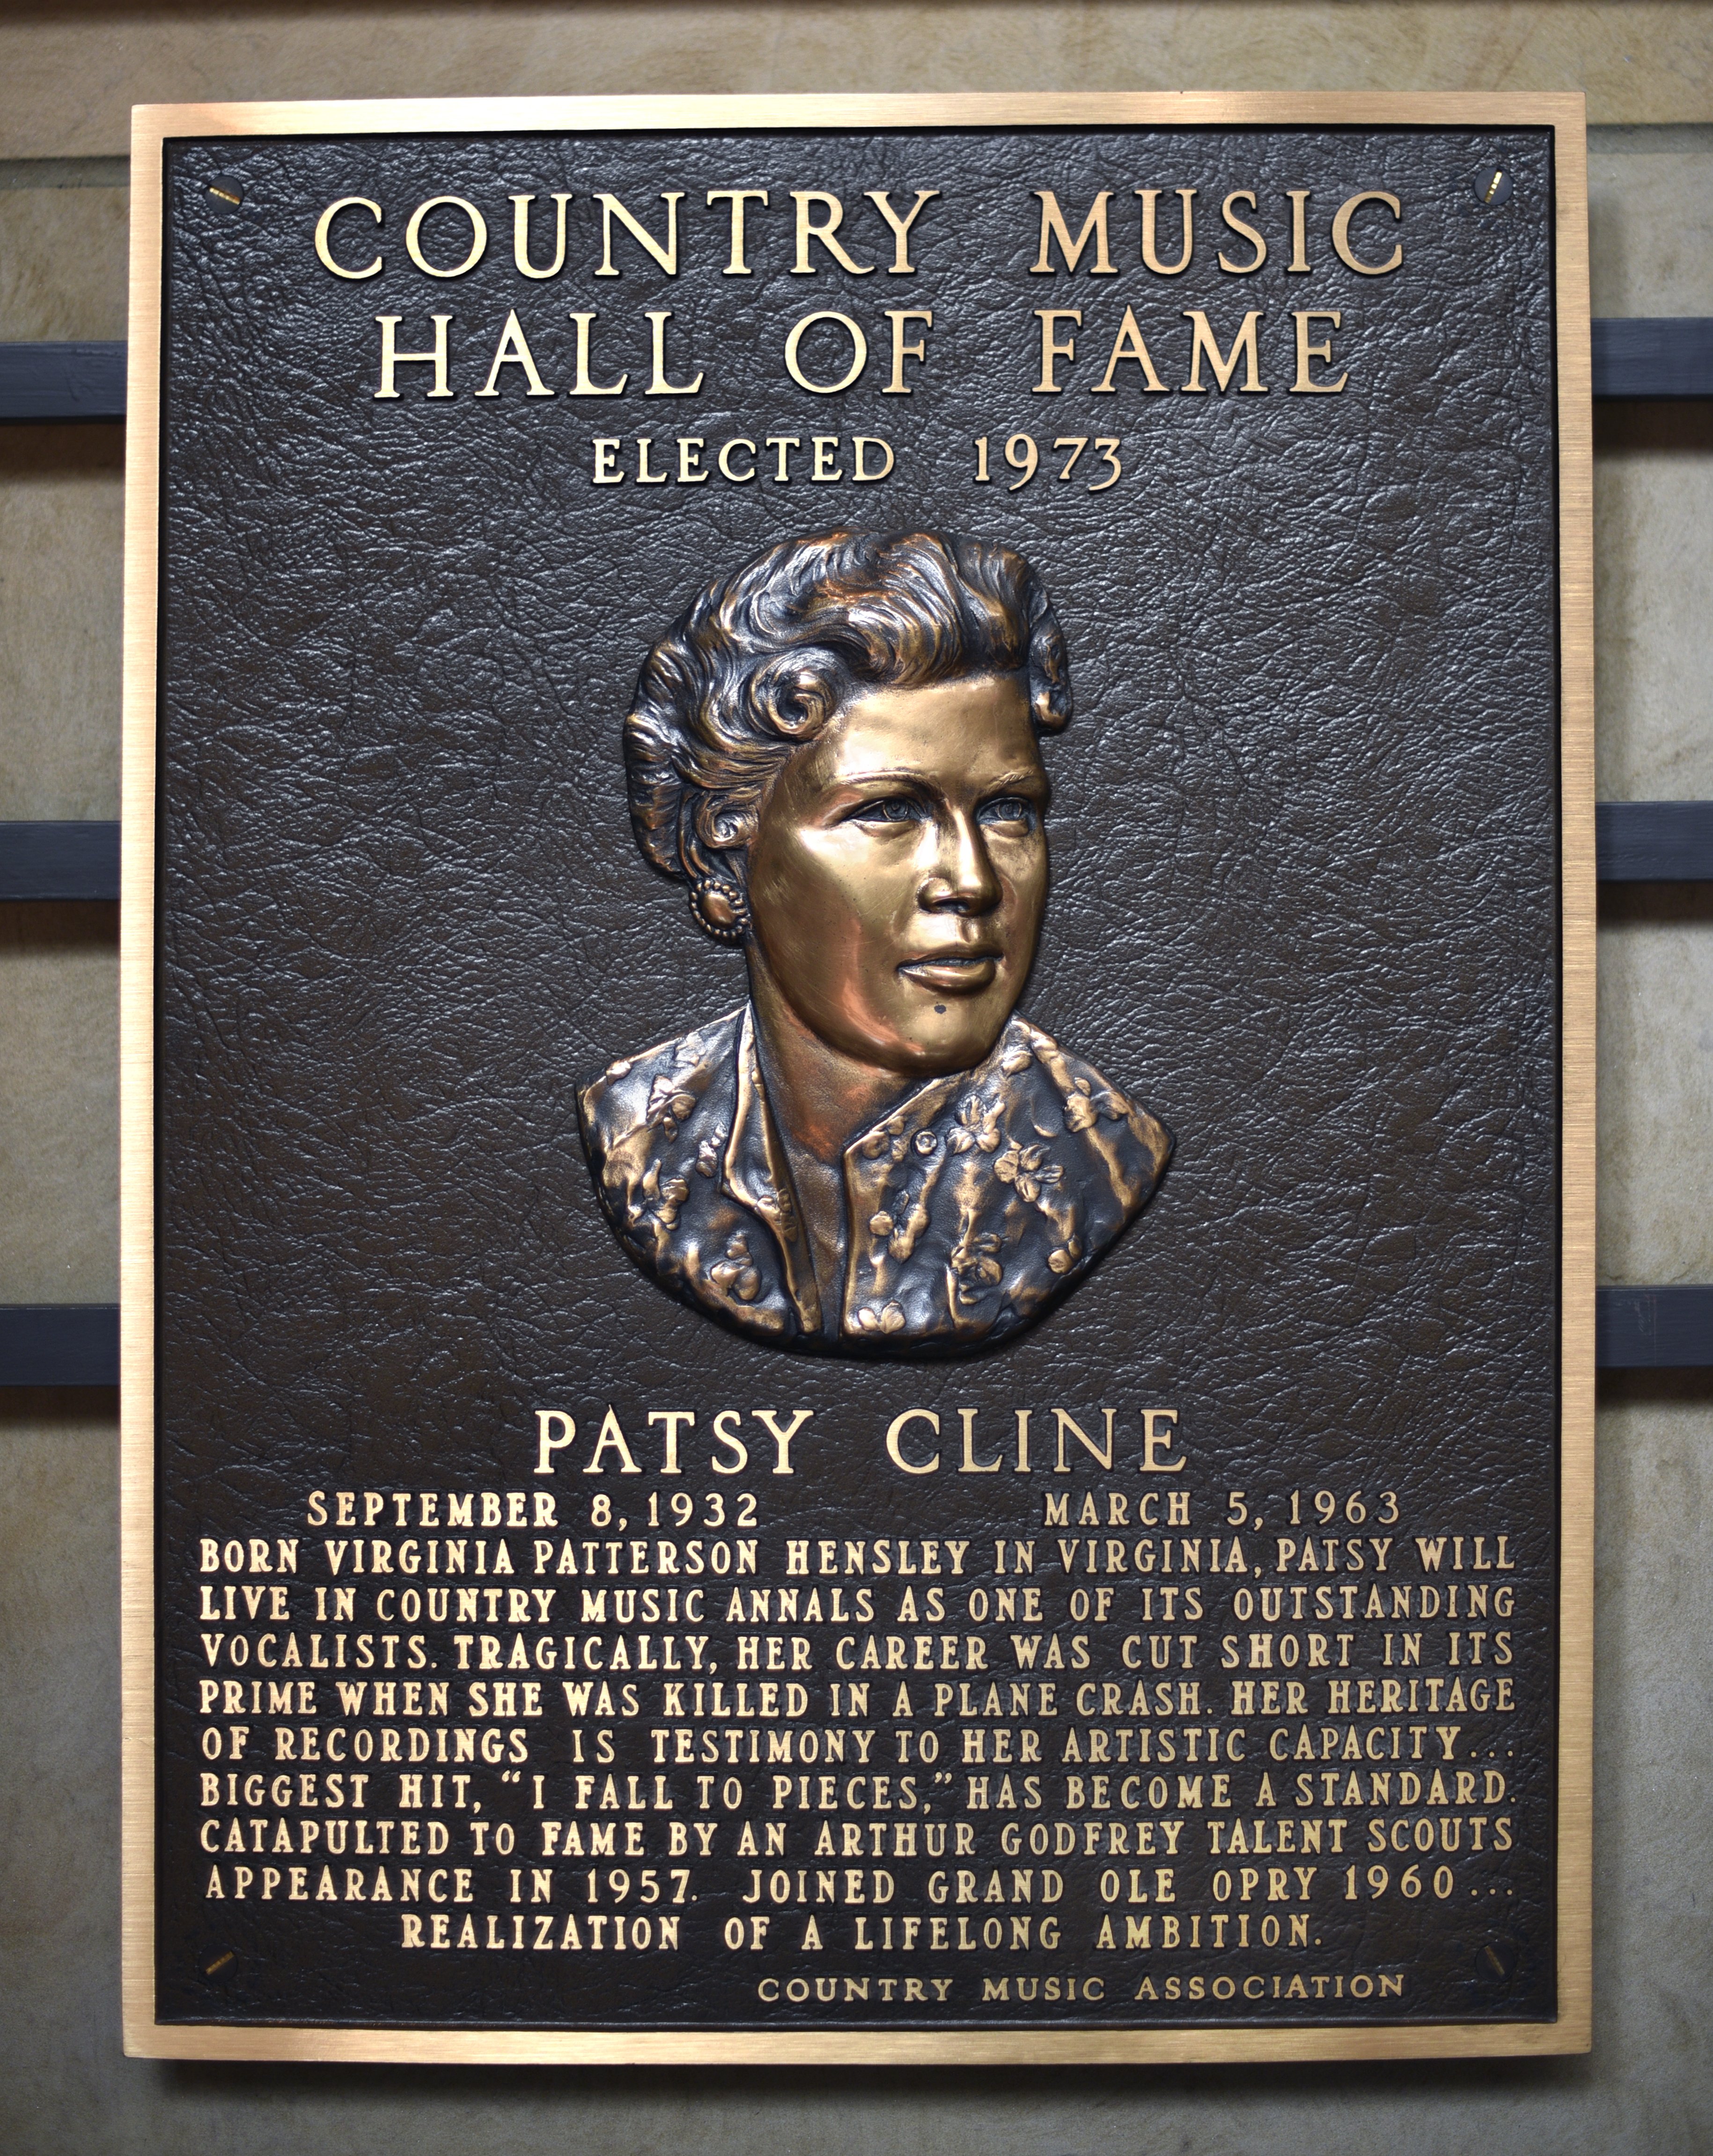 A bronze plaque at the Country Music Hall of Fame and Museum in Nashville, Tennessee taken on September 2, 2019 | Source: Getty Images